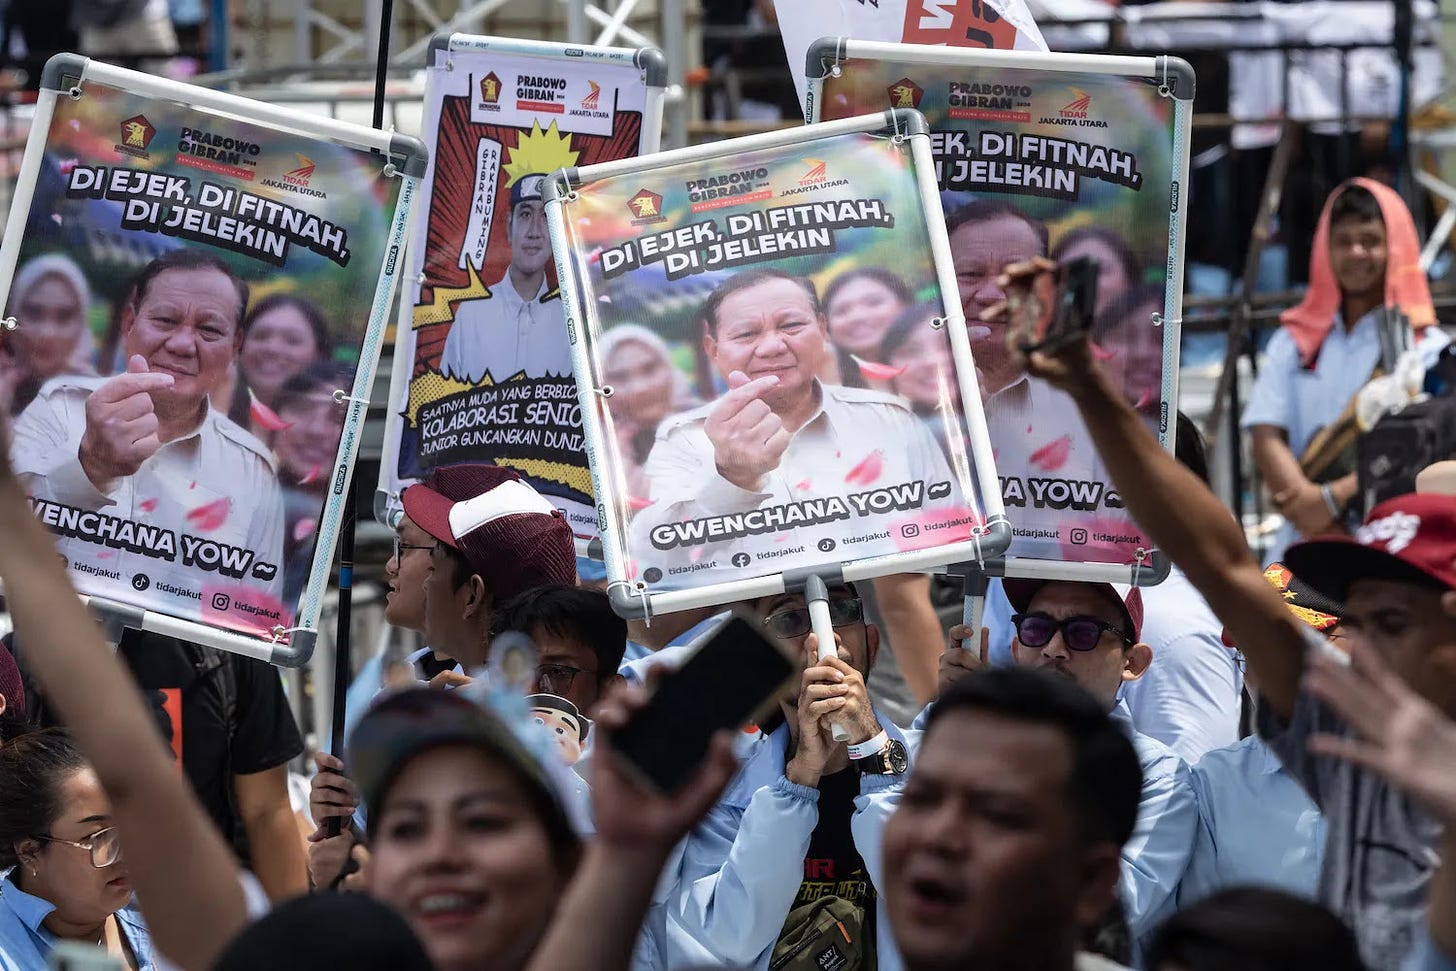 Supporters attend an election campaign for Indonesian Defense Minister Prabowo Subianto.